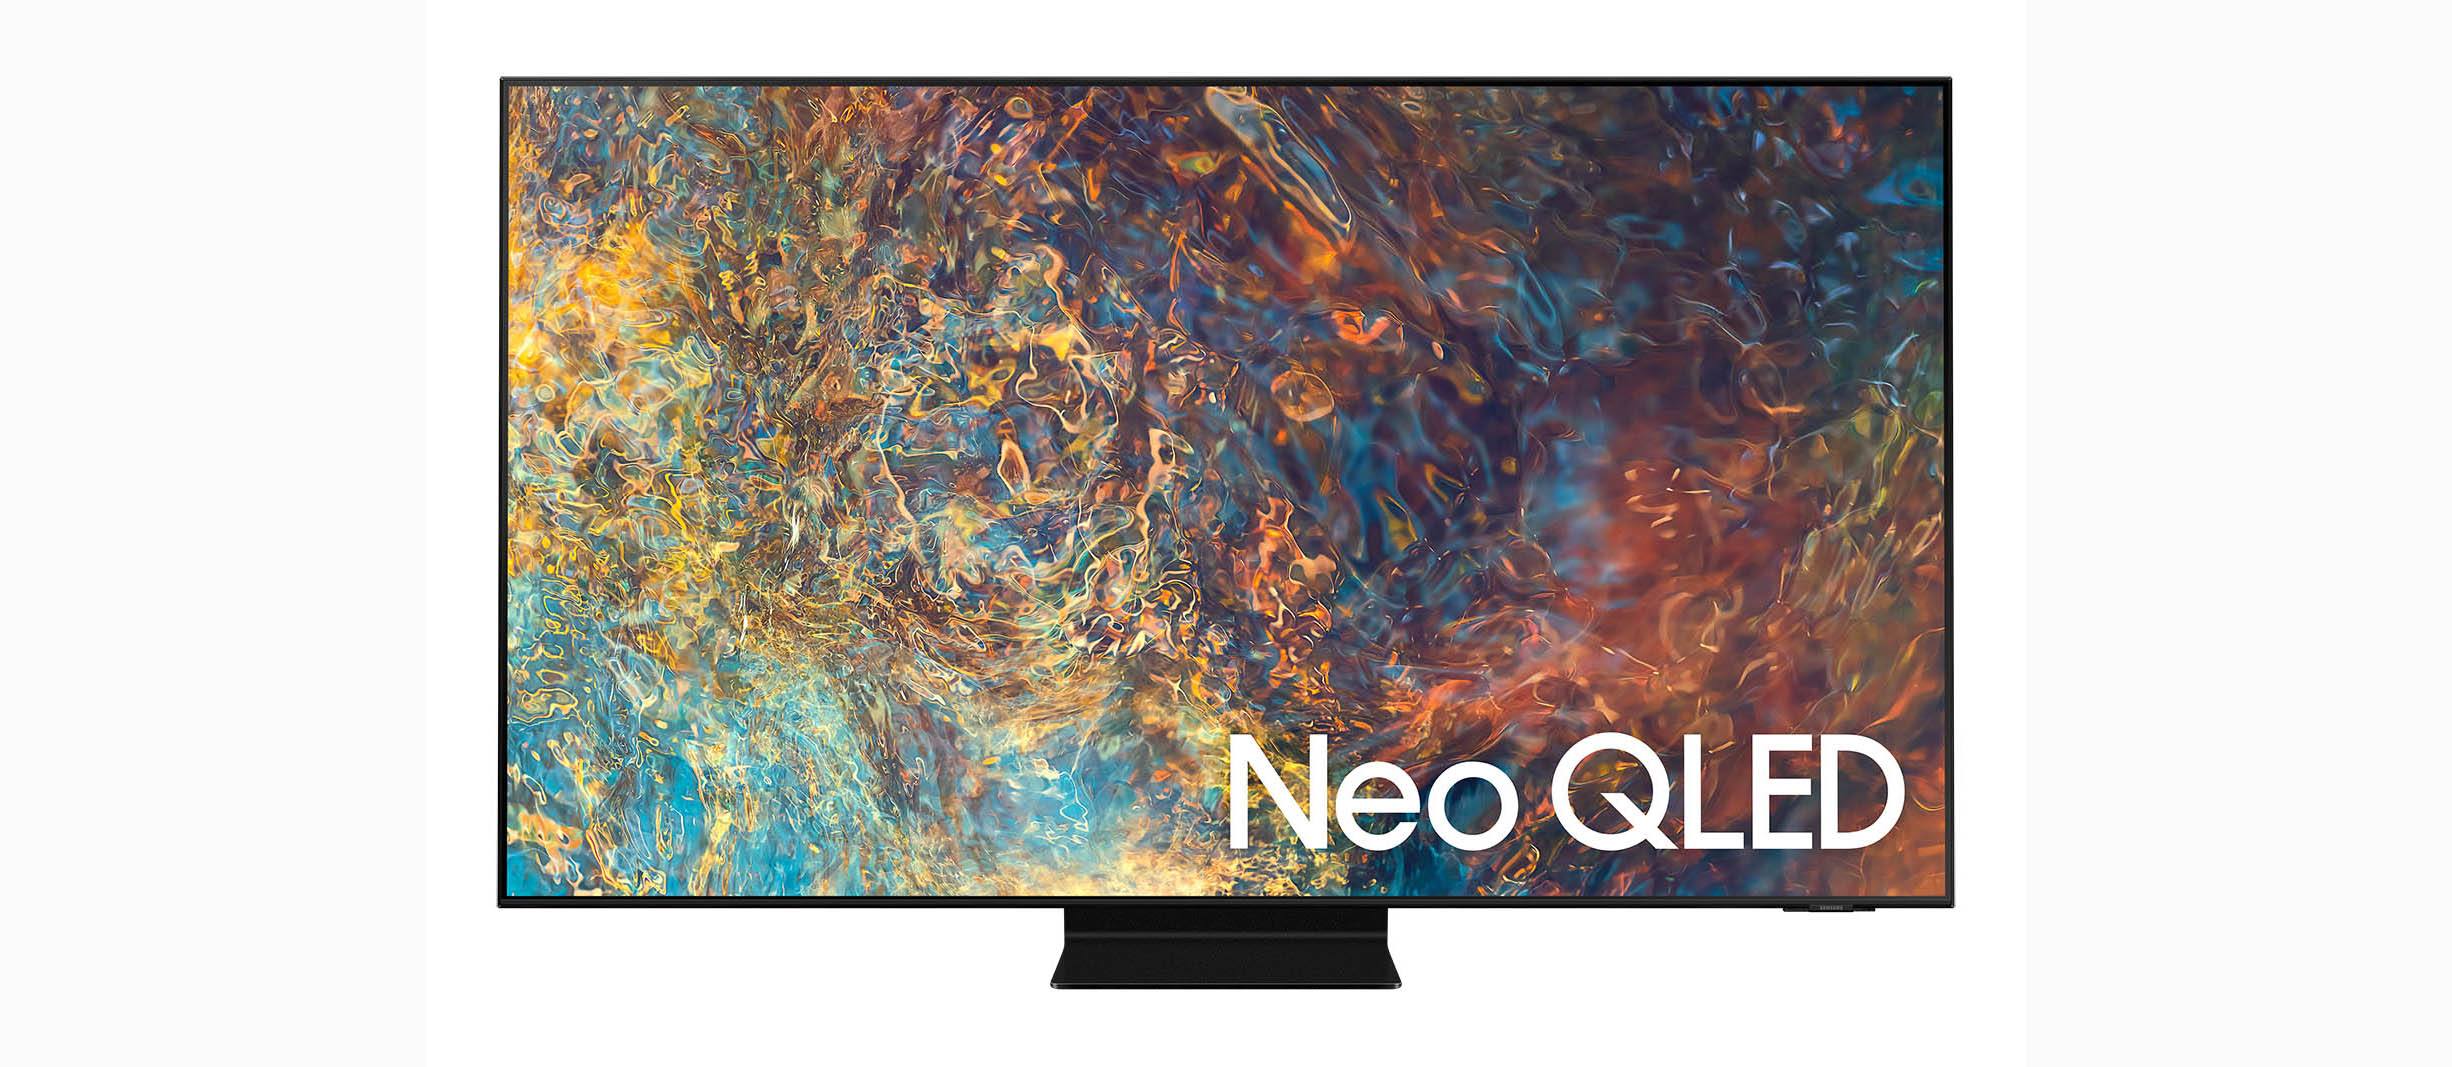 a face-on product photo of Samsung's Neo QLED TV for CES 2021